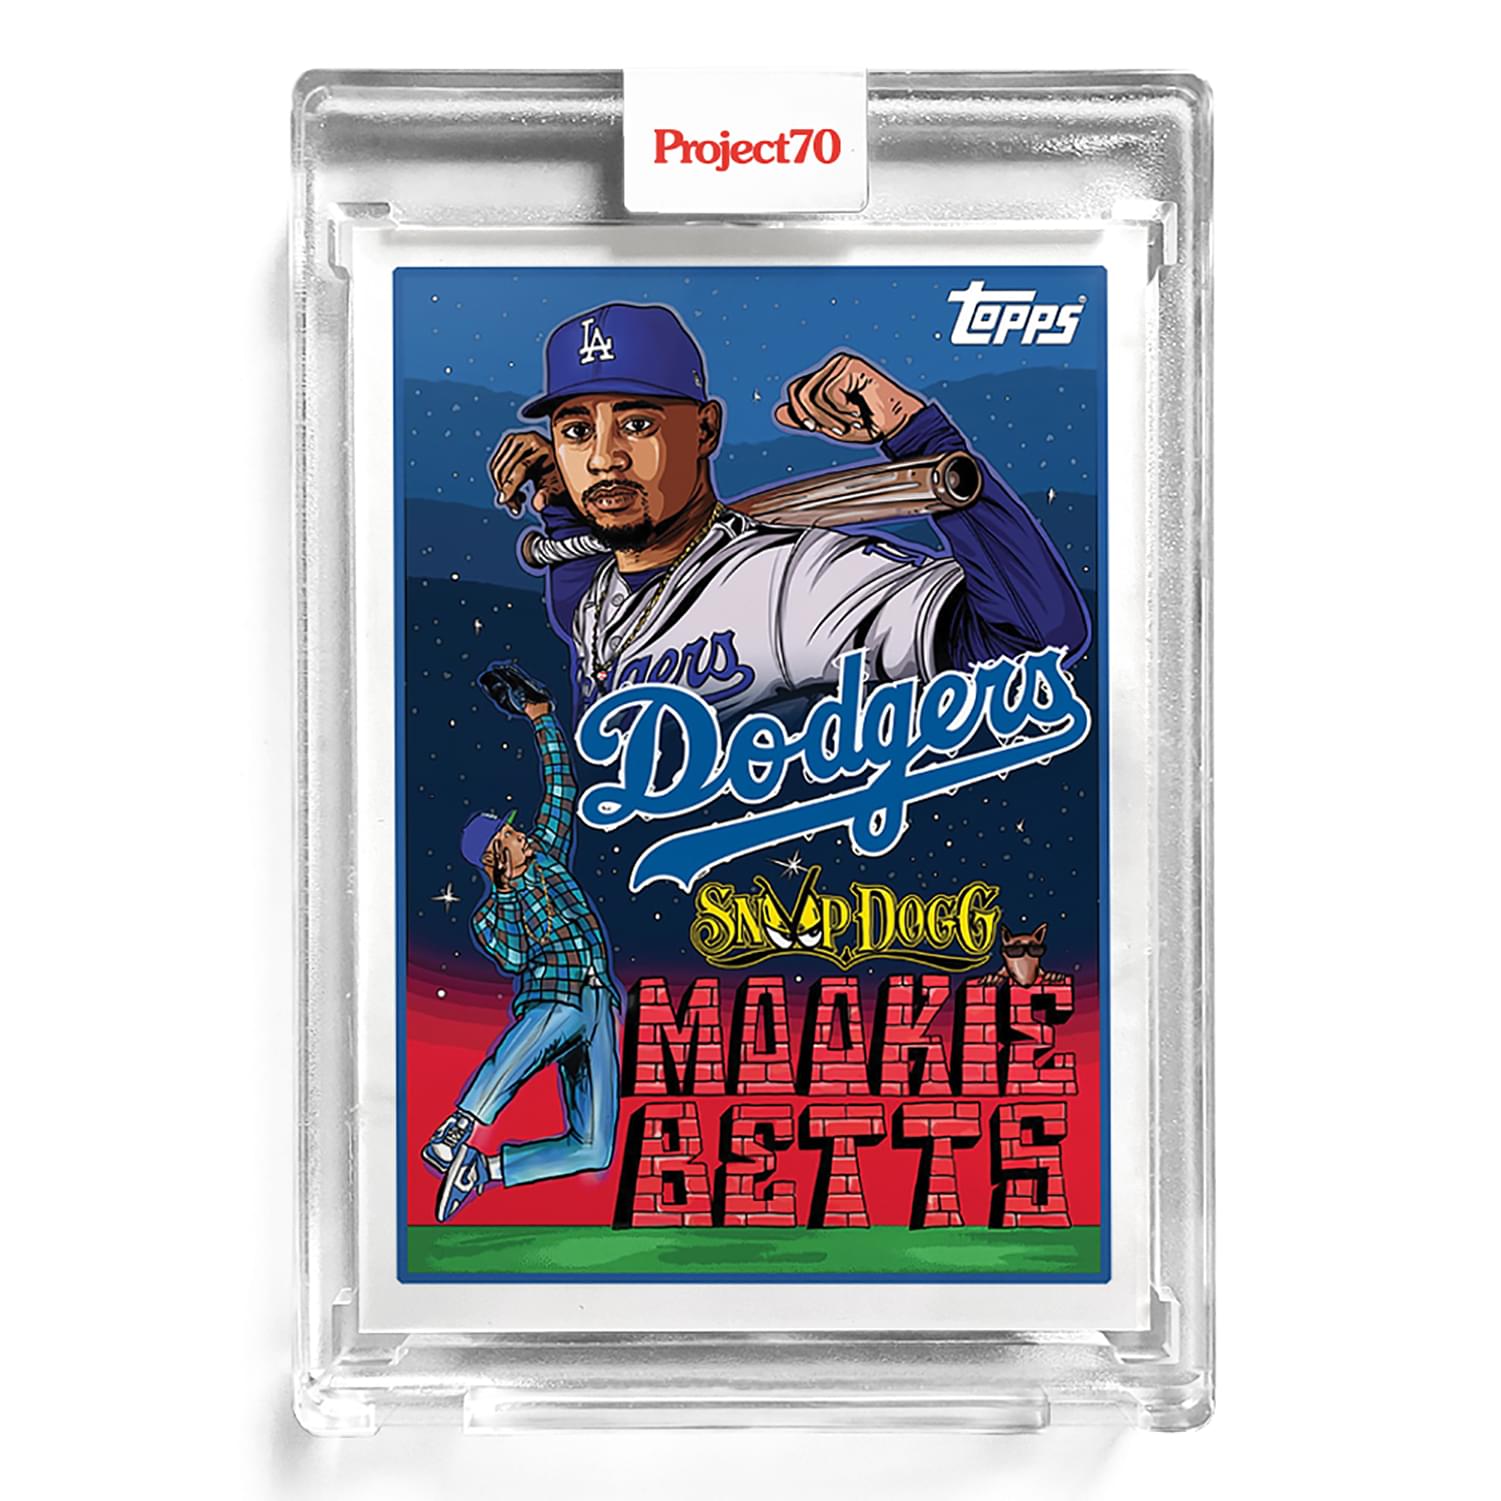 Topps Project70 Card 89 - 1993 Mookie Betts by Snoop Dogg